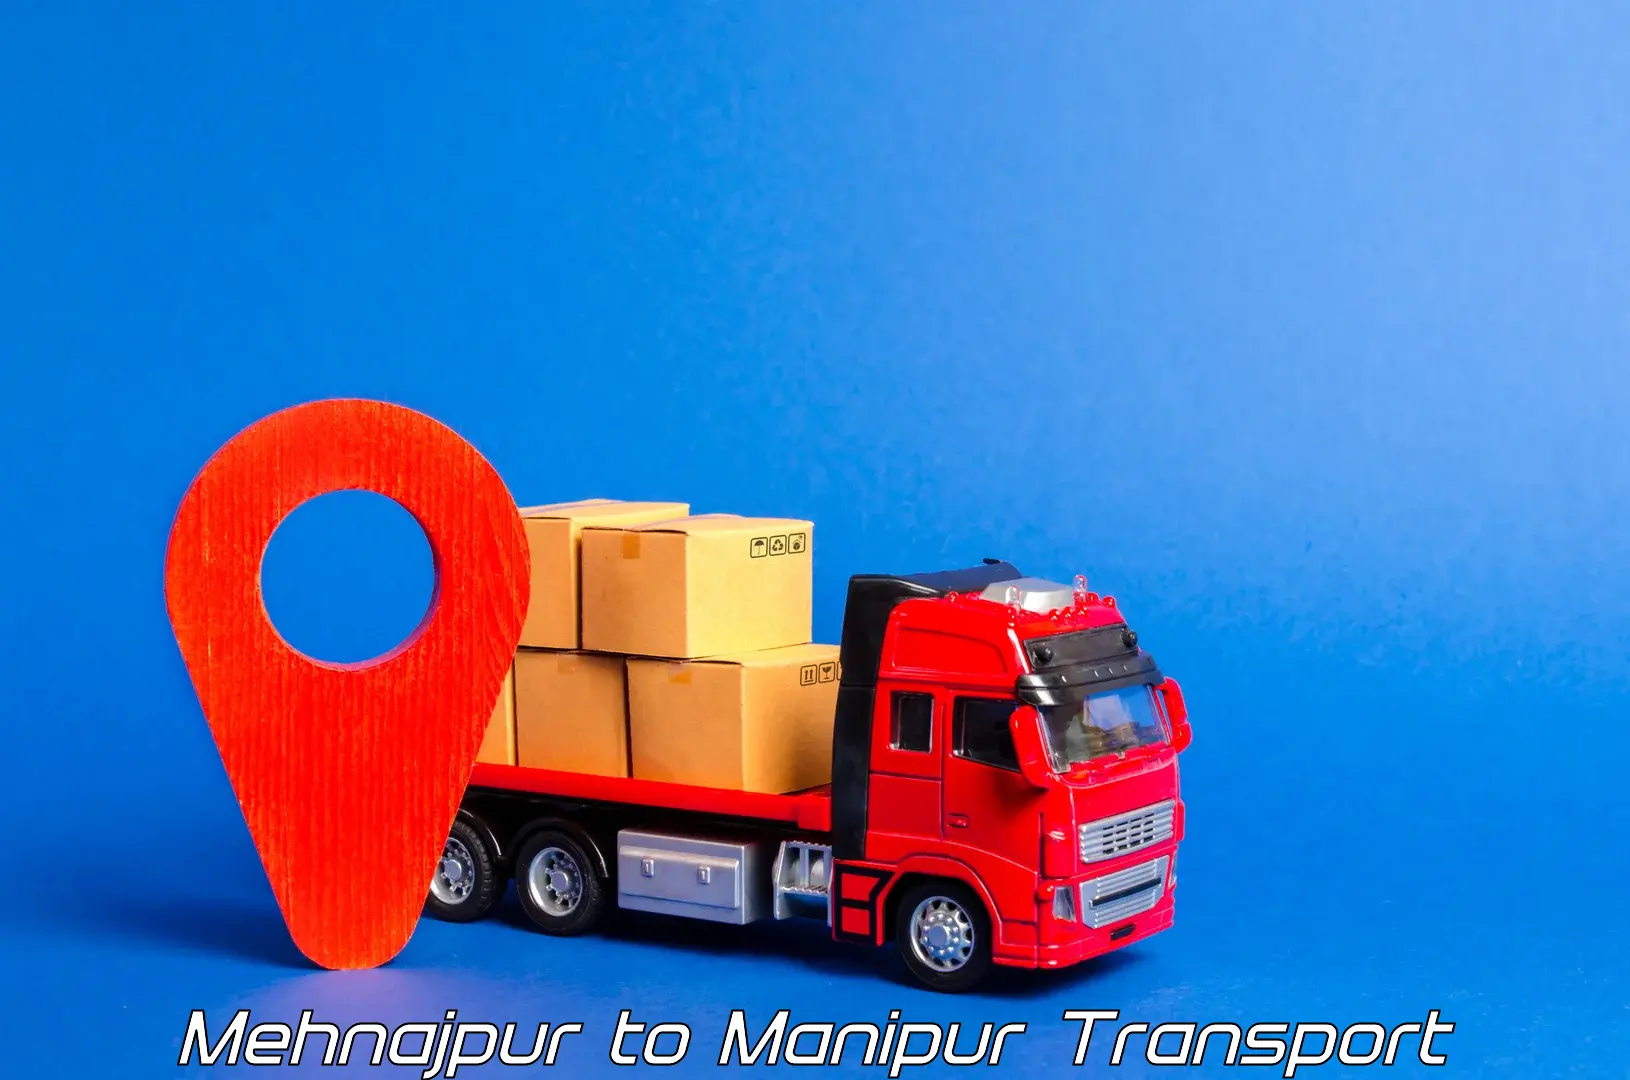 Daily transport service Mehnajpur to Manipur